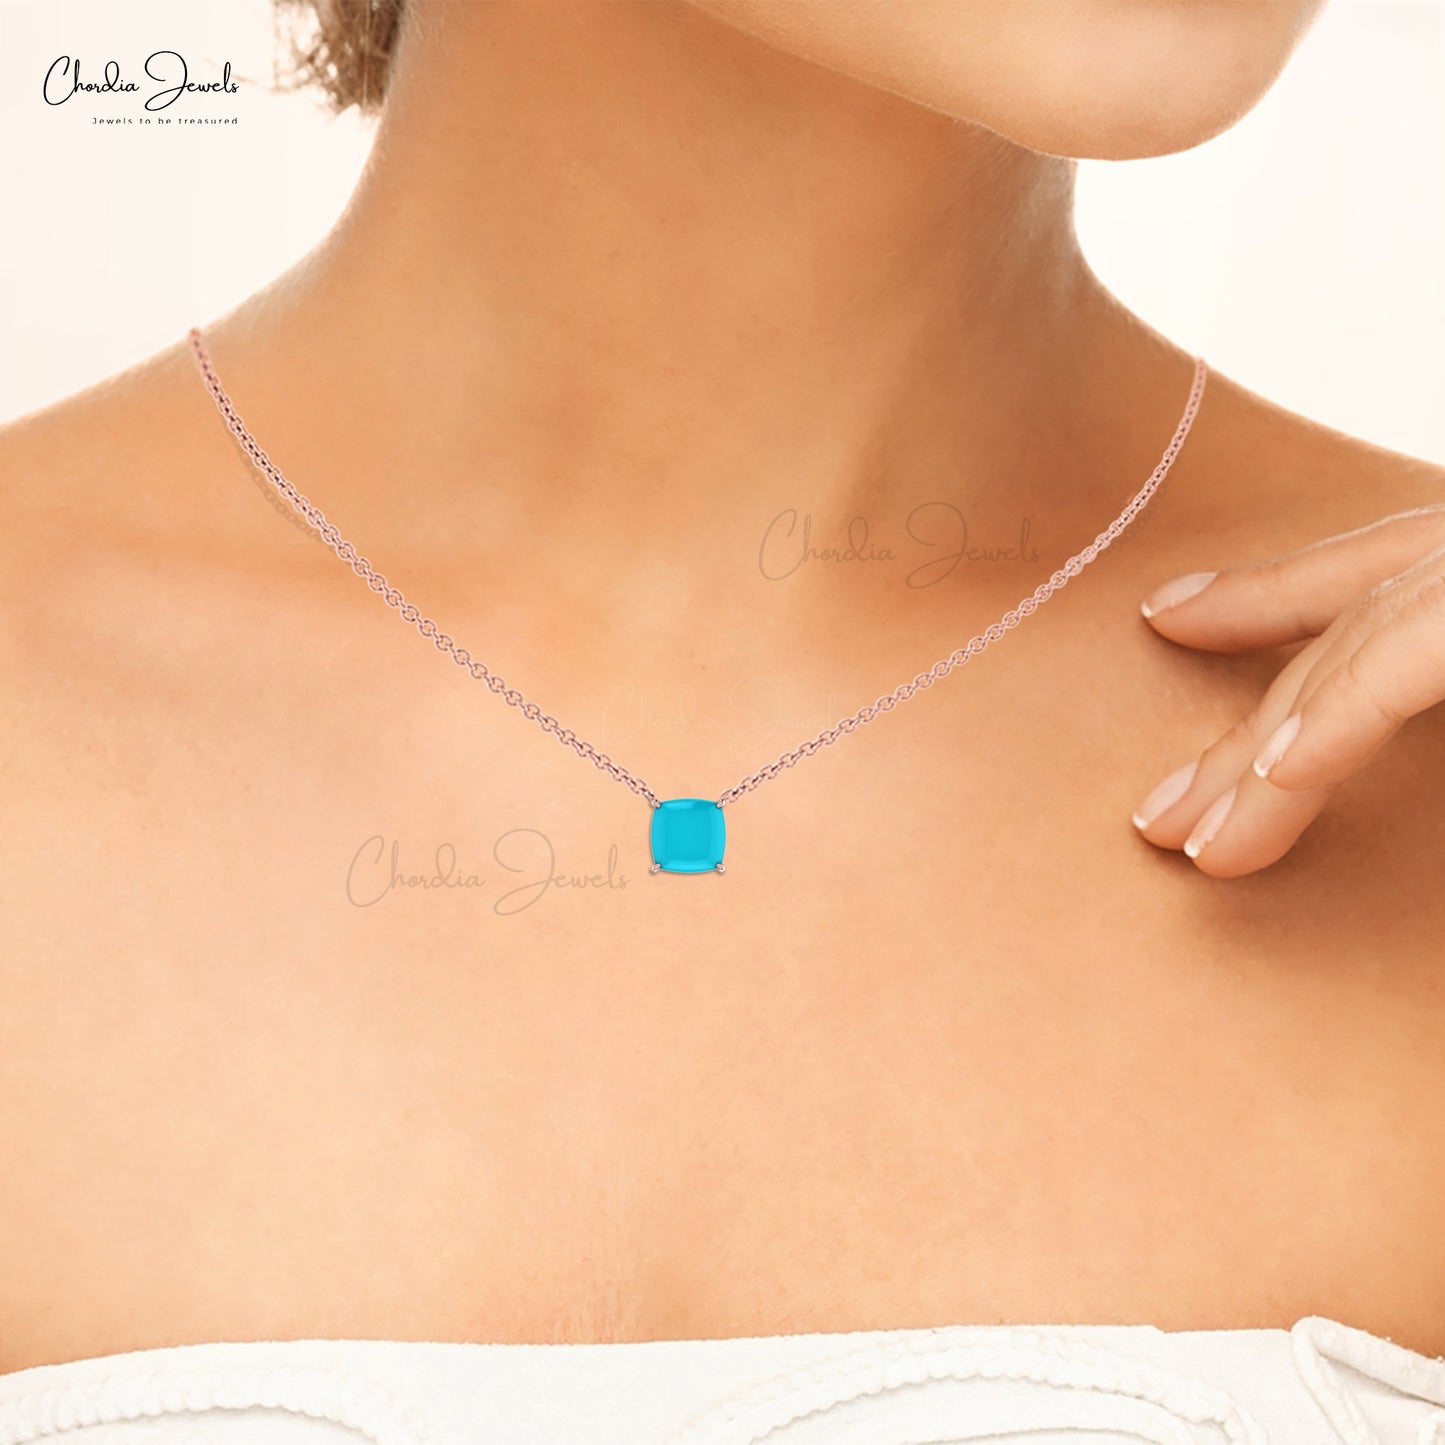 Teardrop Gemstone Necklace/dainty Turquoise Pendant/minimal Layering  Necklace/gift for Wife/gift for Her/bridesmaid Gift/christmas Gift/n268 -  Etsy | Gemstone necklace, Turquoise pendant, Gift necklace